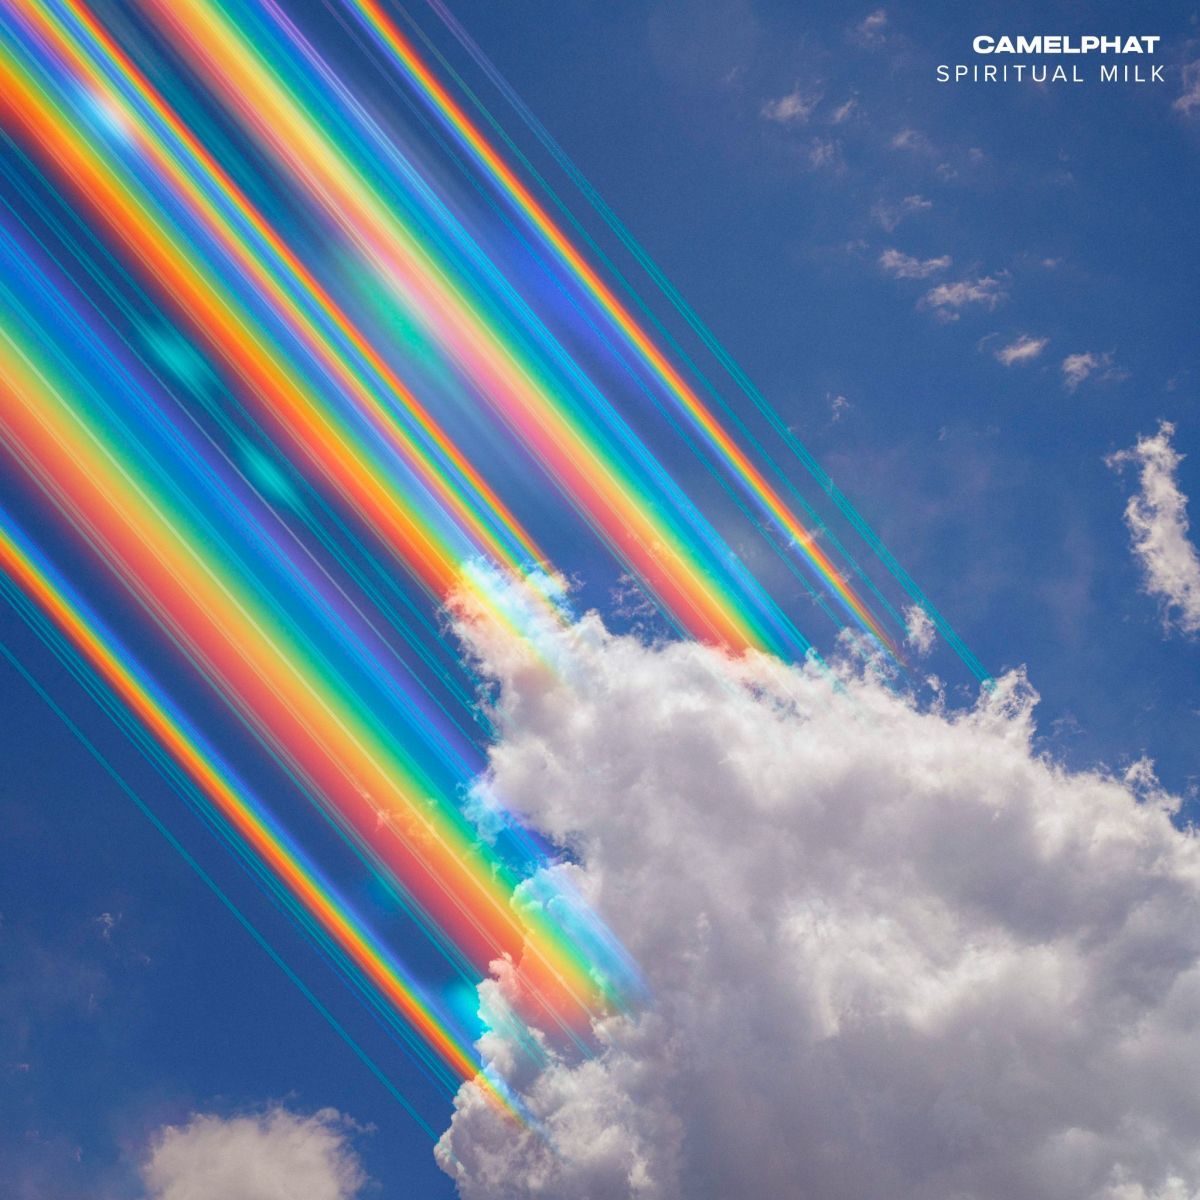 The cover of CamelPhat's "Spiritual Milk" album was inspired by surrealism and "modern psychedelic" artwork.